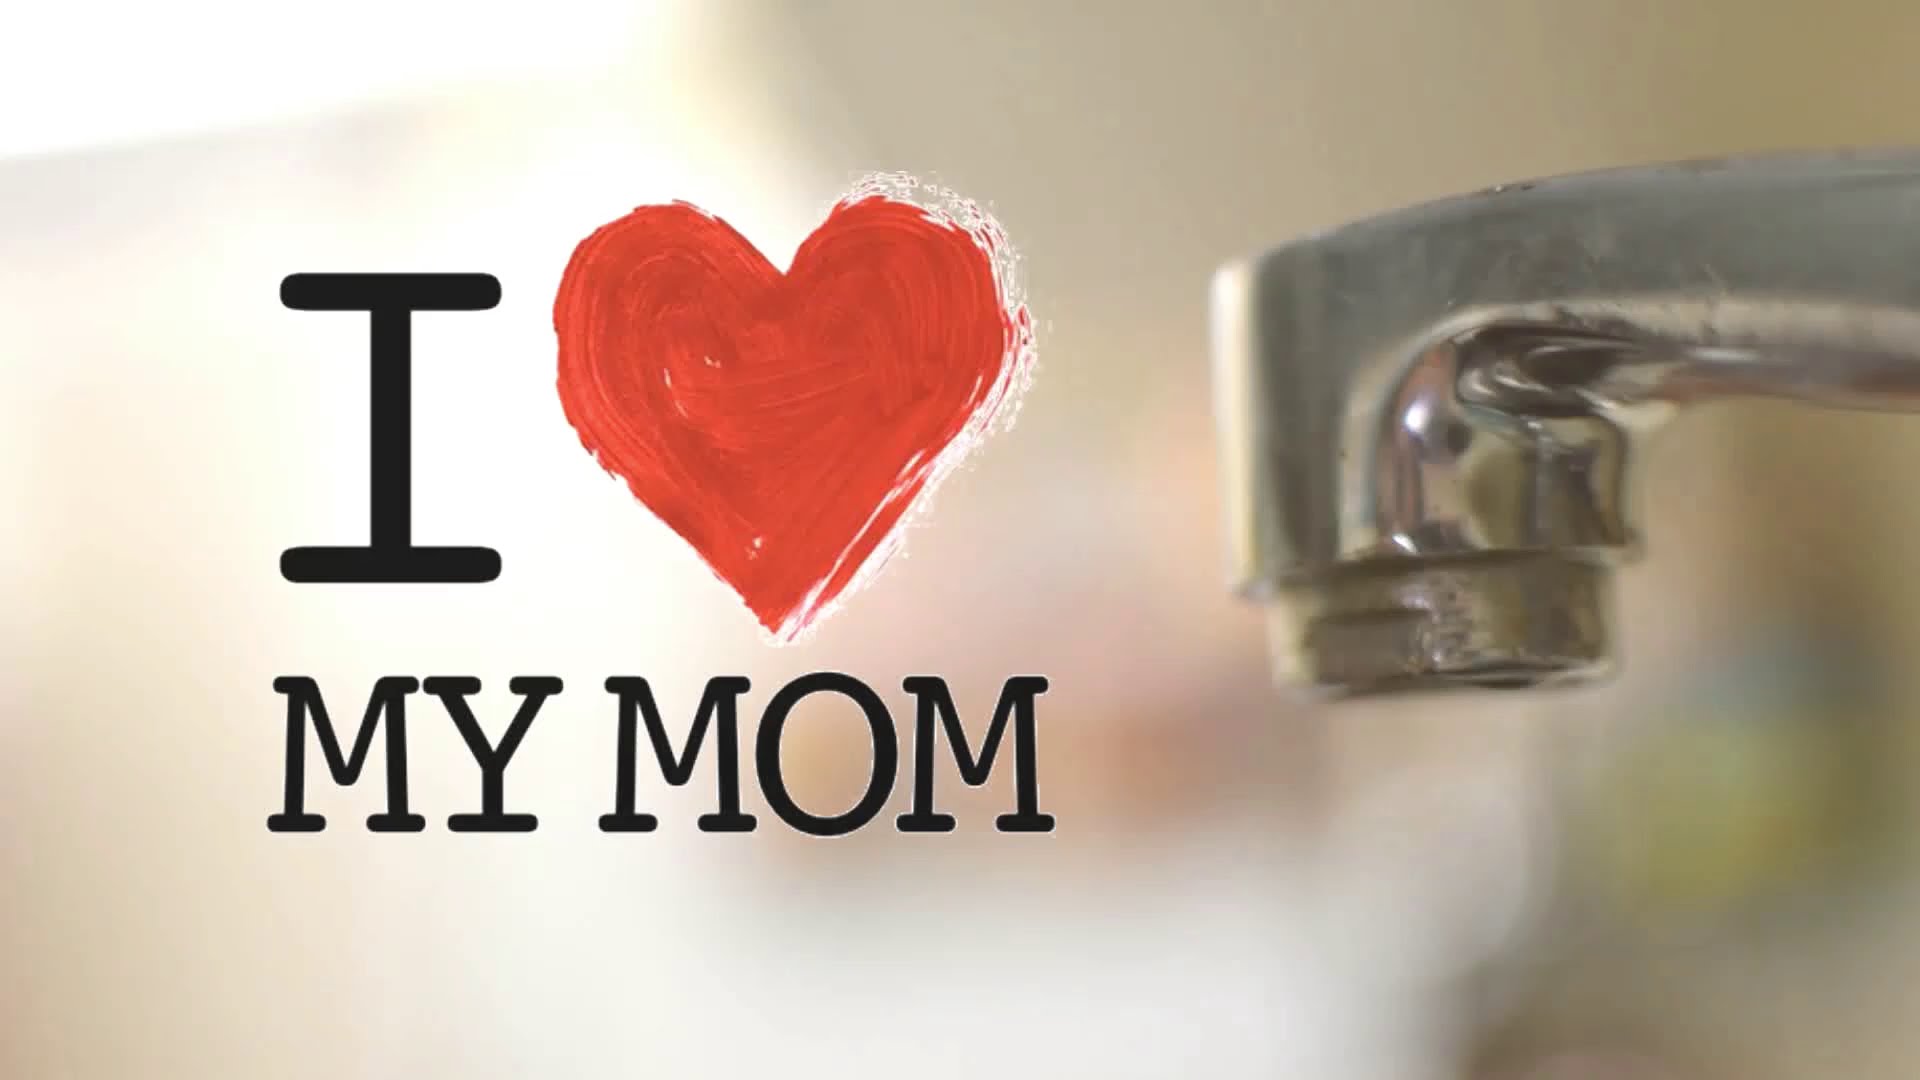 I Love You Mom Wallpapers HD 1920x1080